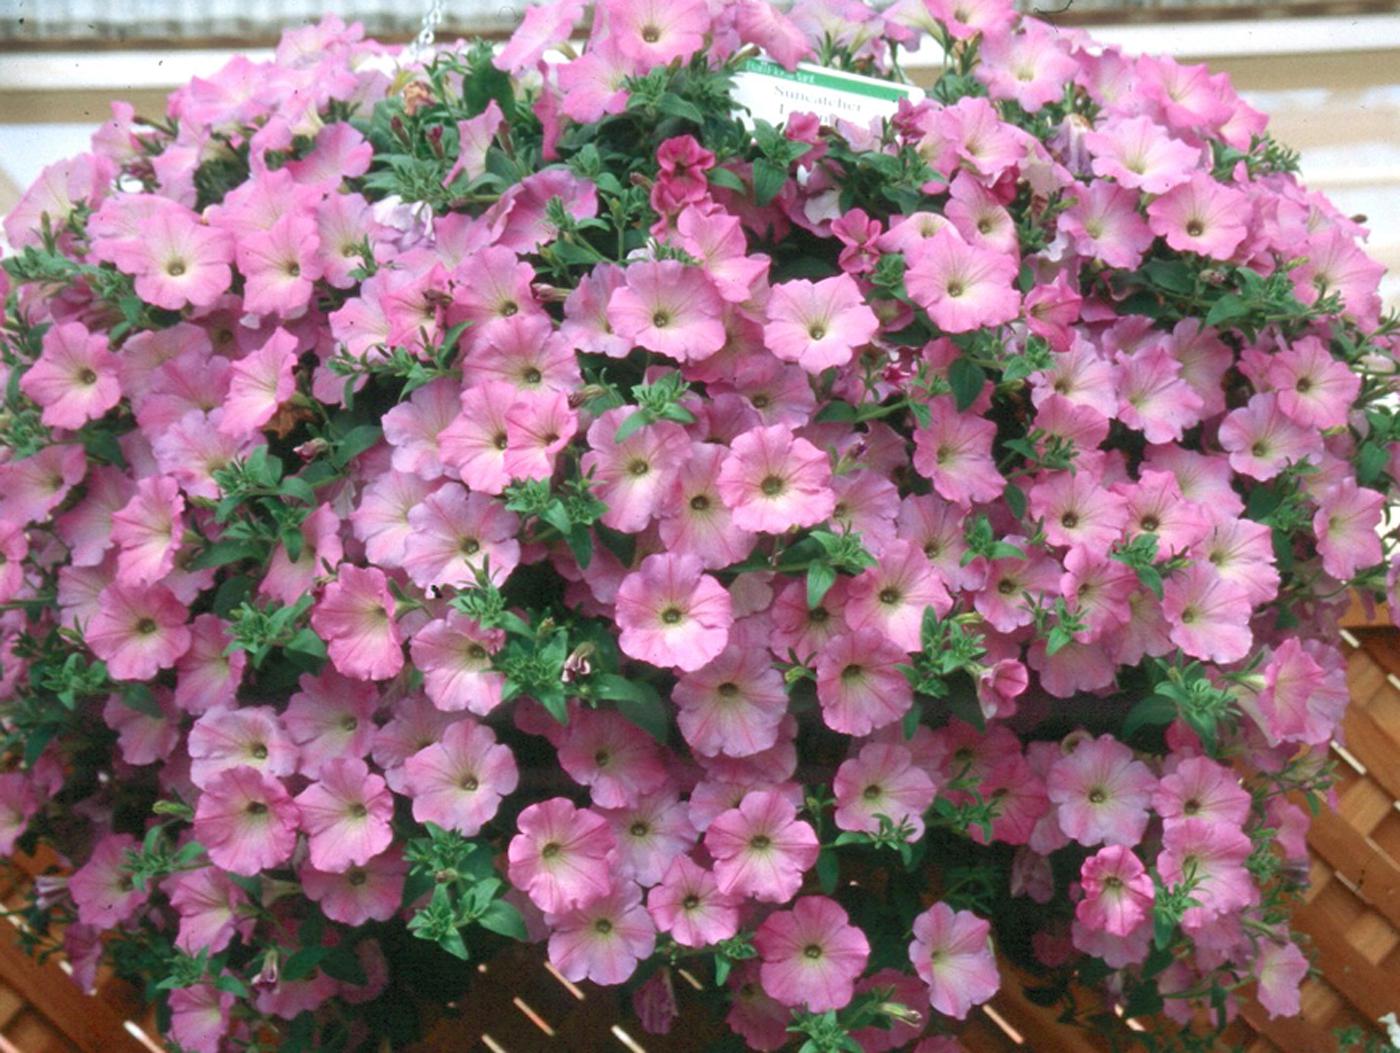 Ball Flora Plant, a division of Ball Seed, is introducing the Suncatcher series of petunias . These are large showy petunias that bring a bright, colorful impact to the garden or basket. 